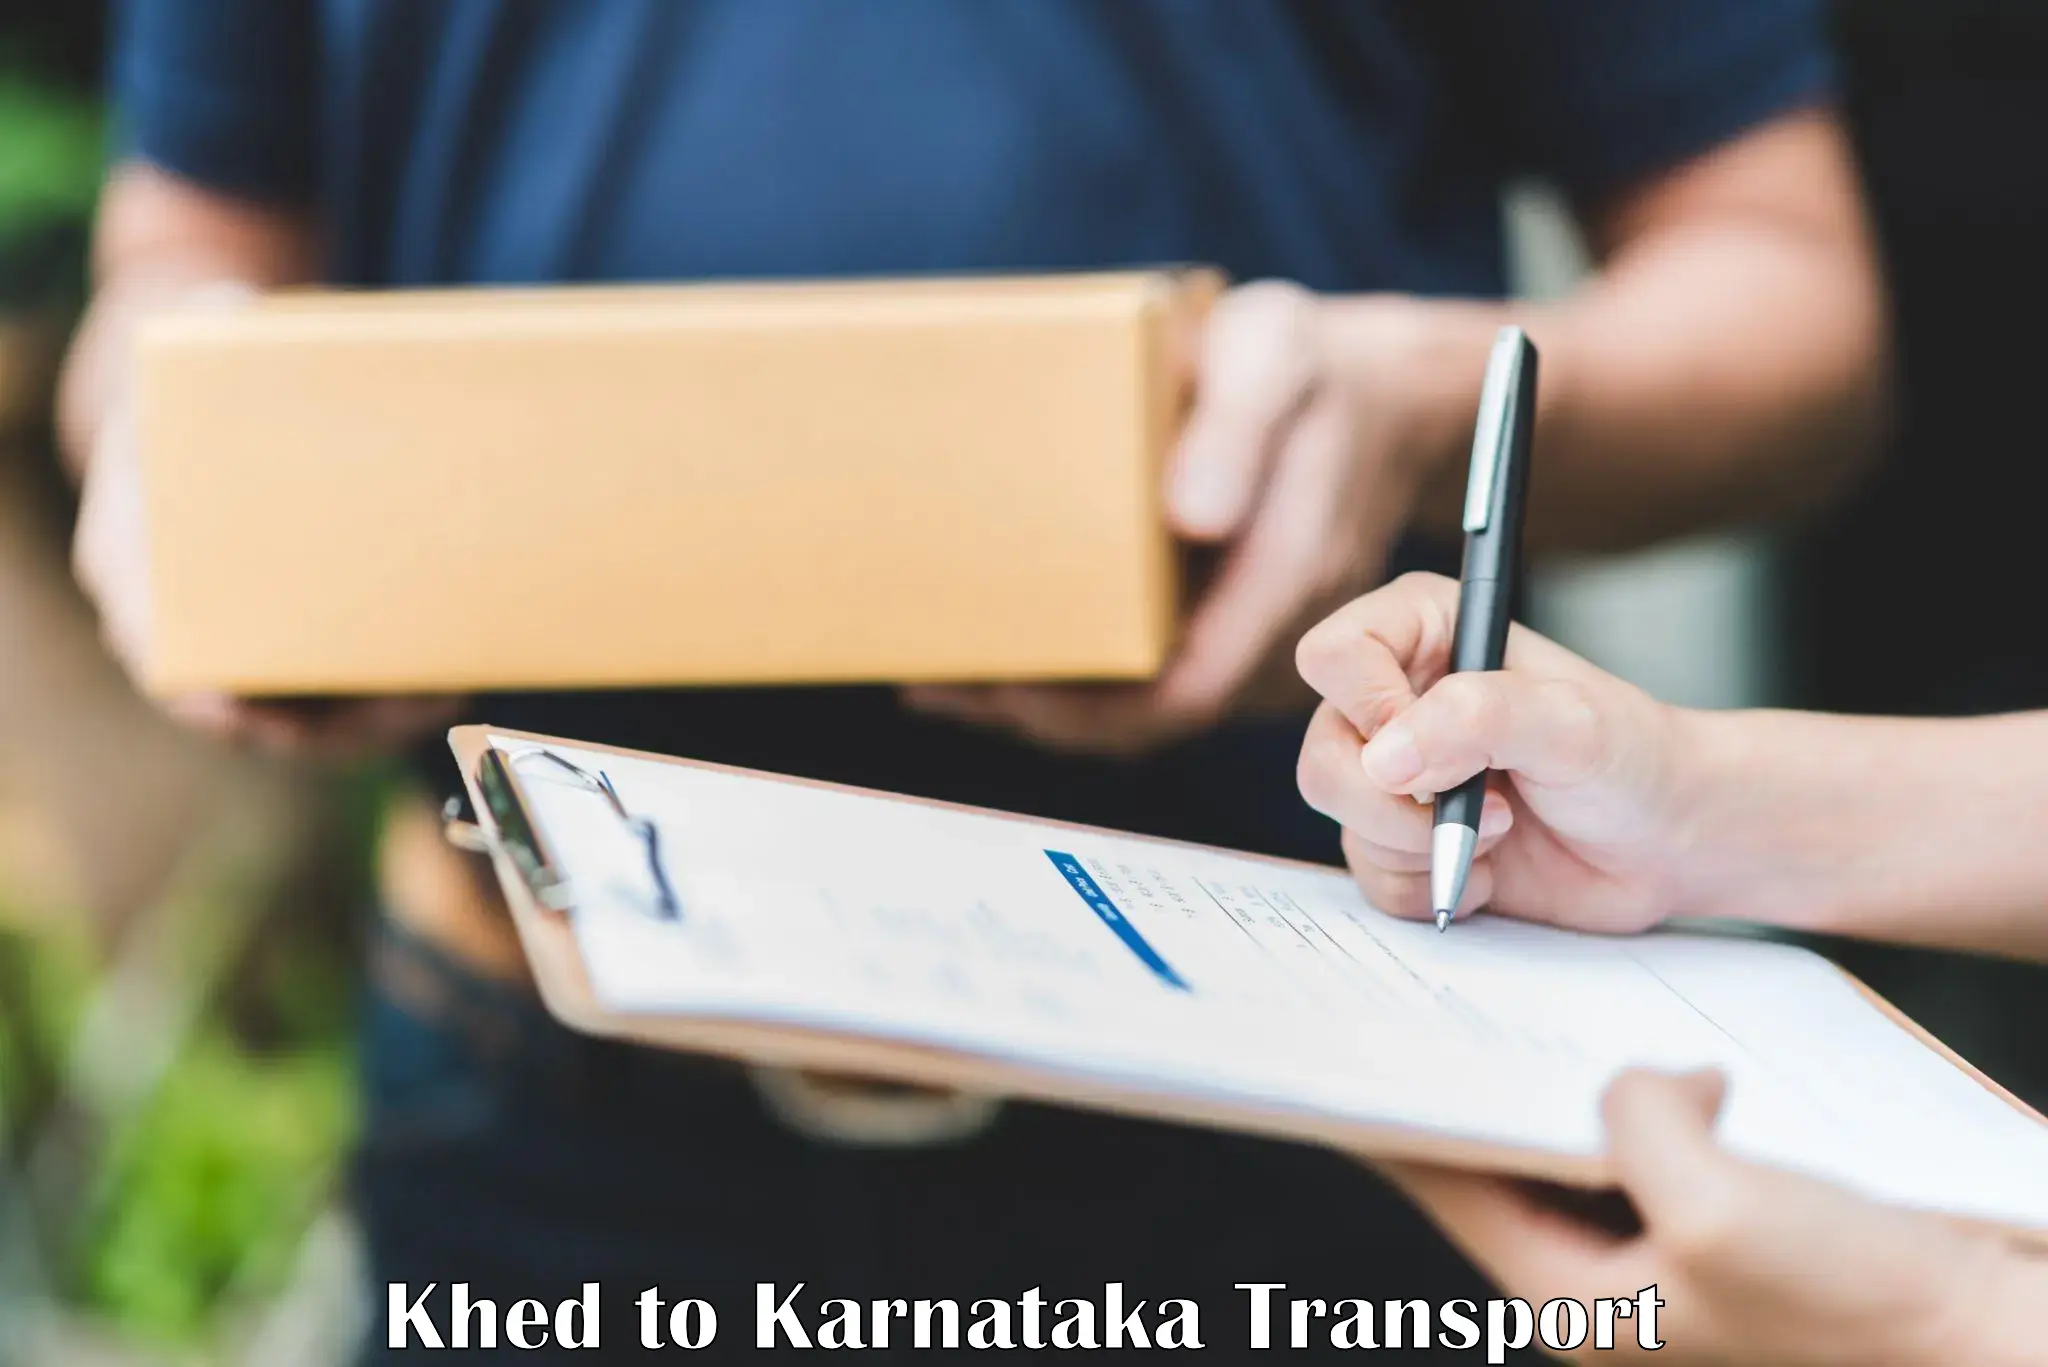 Online transport service Khed to Yellapur